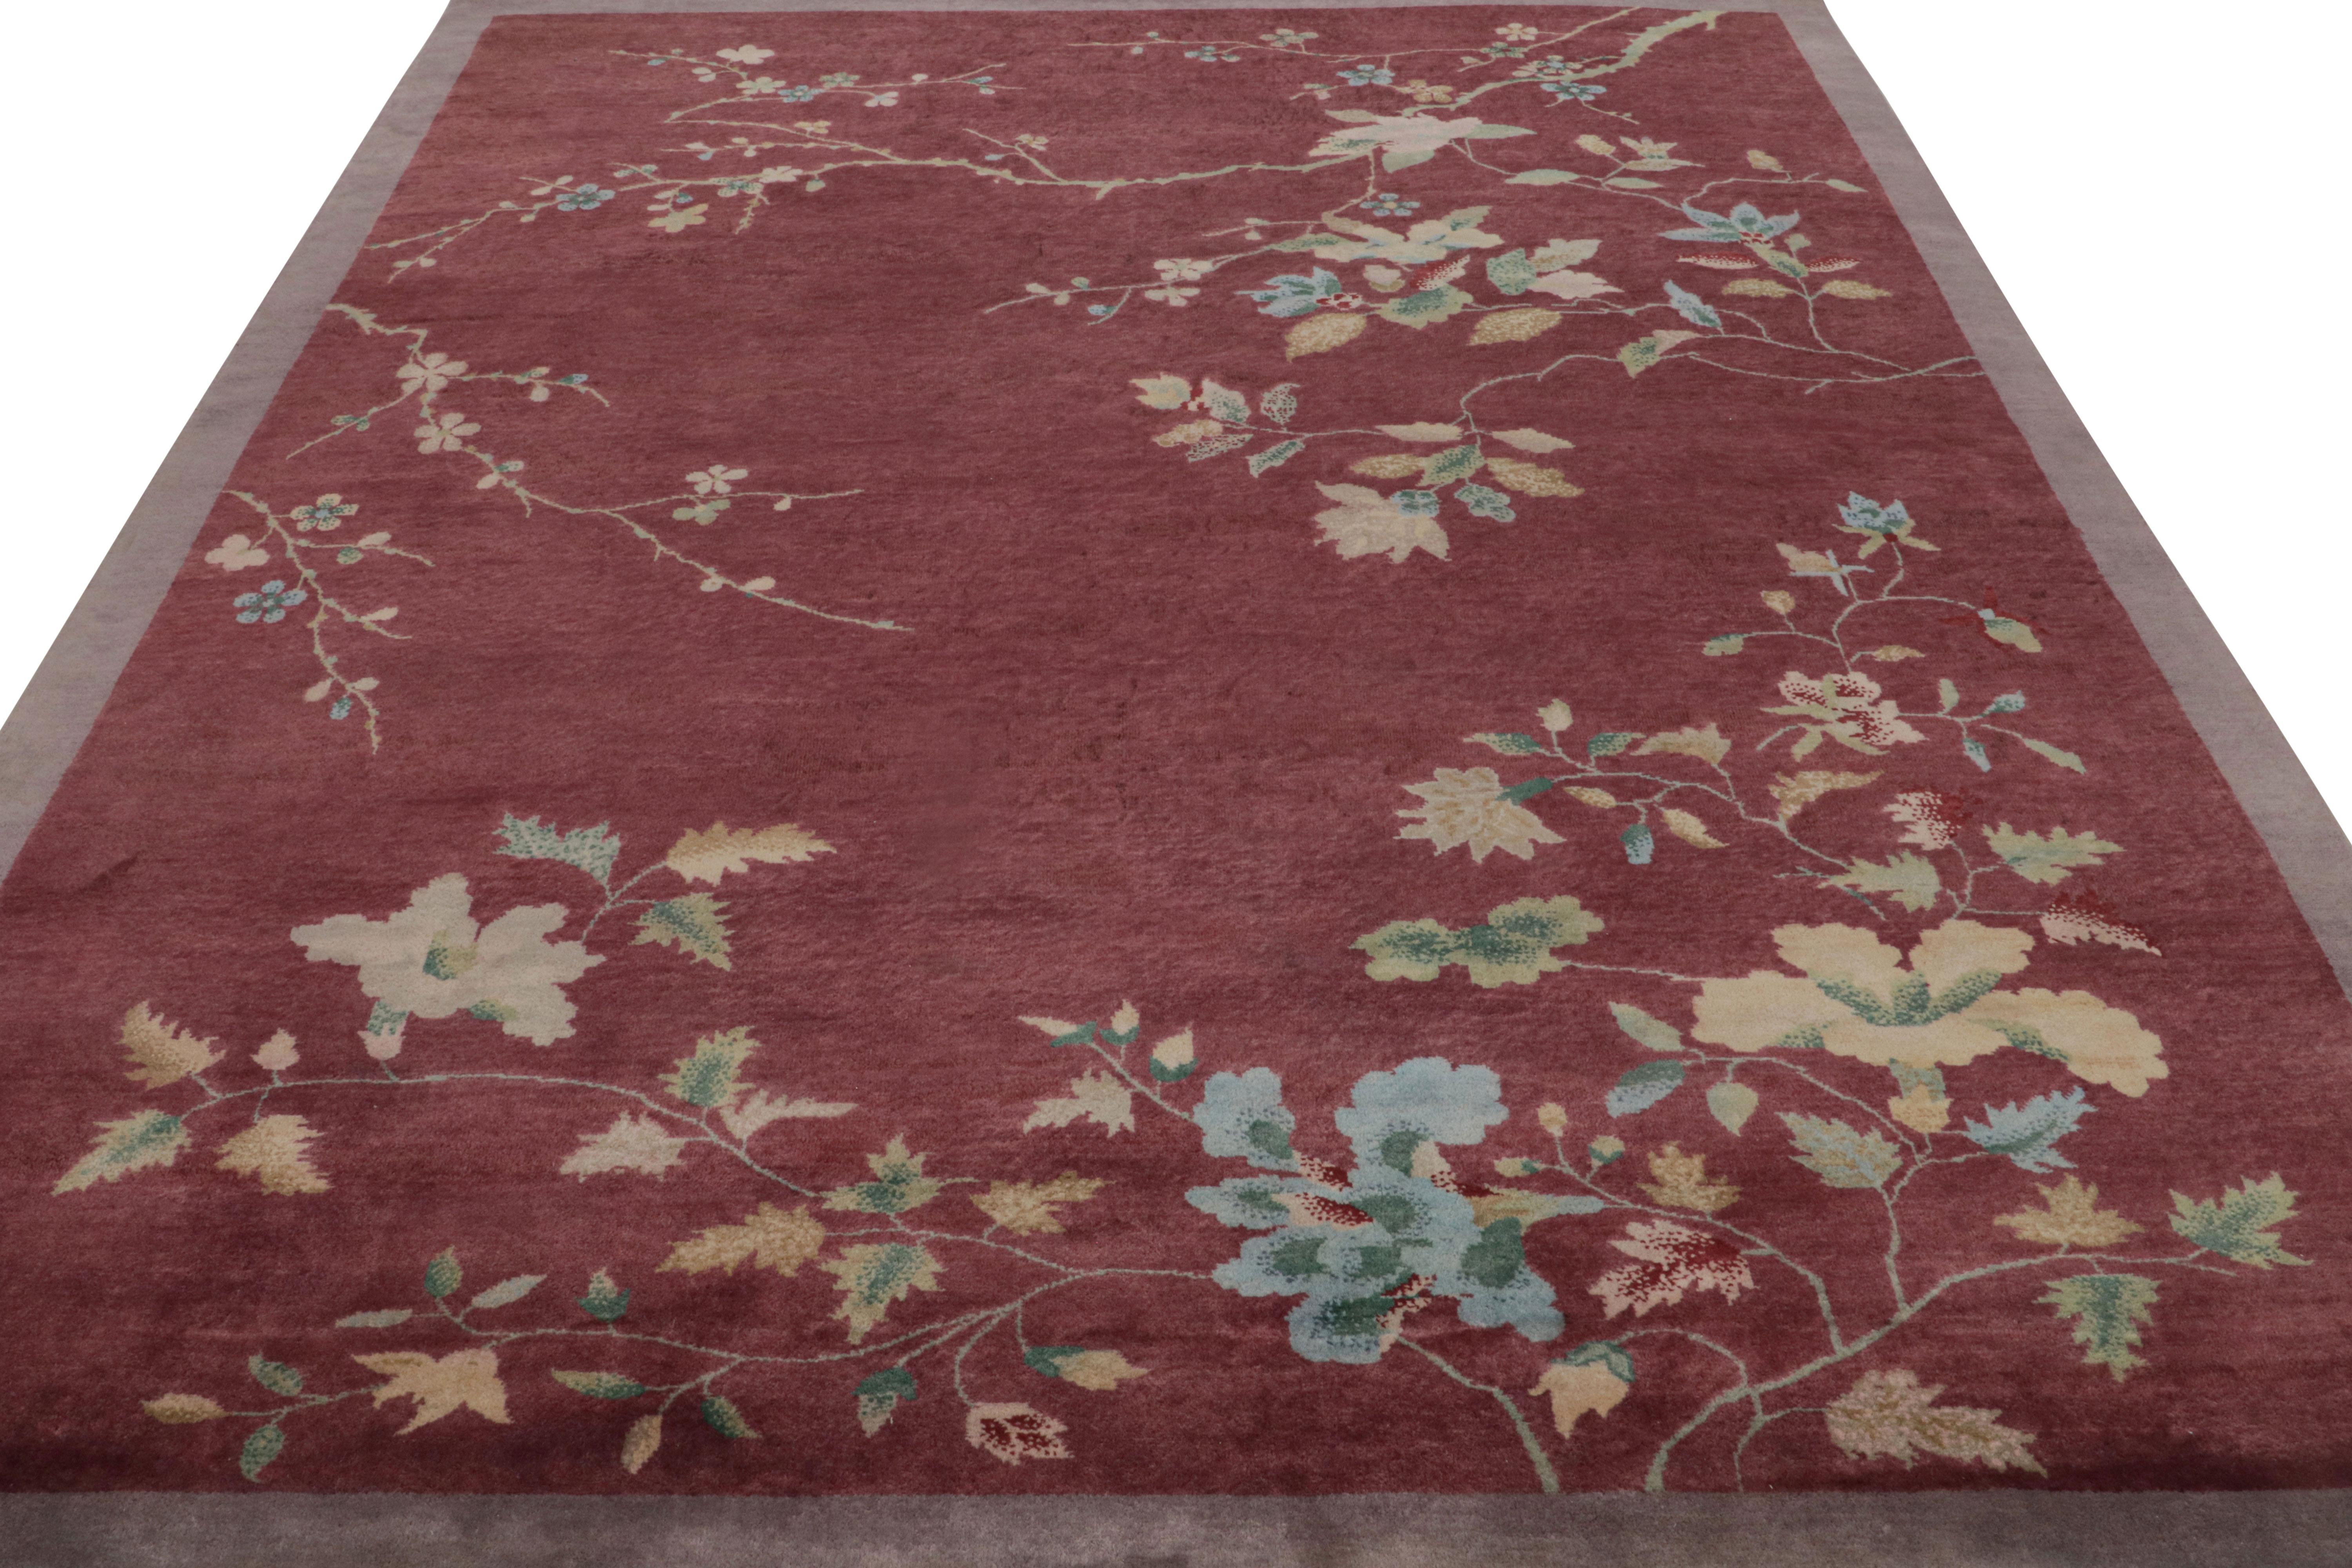 Indian Rug & Kilim’s Chinese Art Deco style rug, with Geometric Floral Patterns For Sale